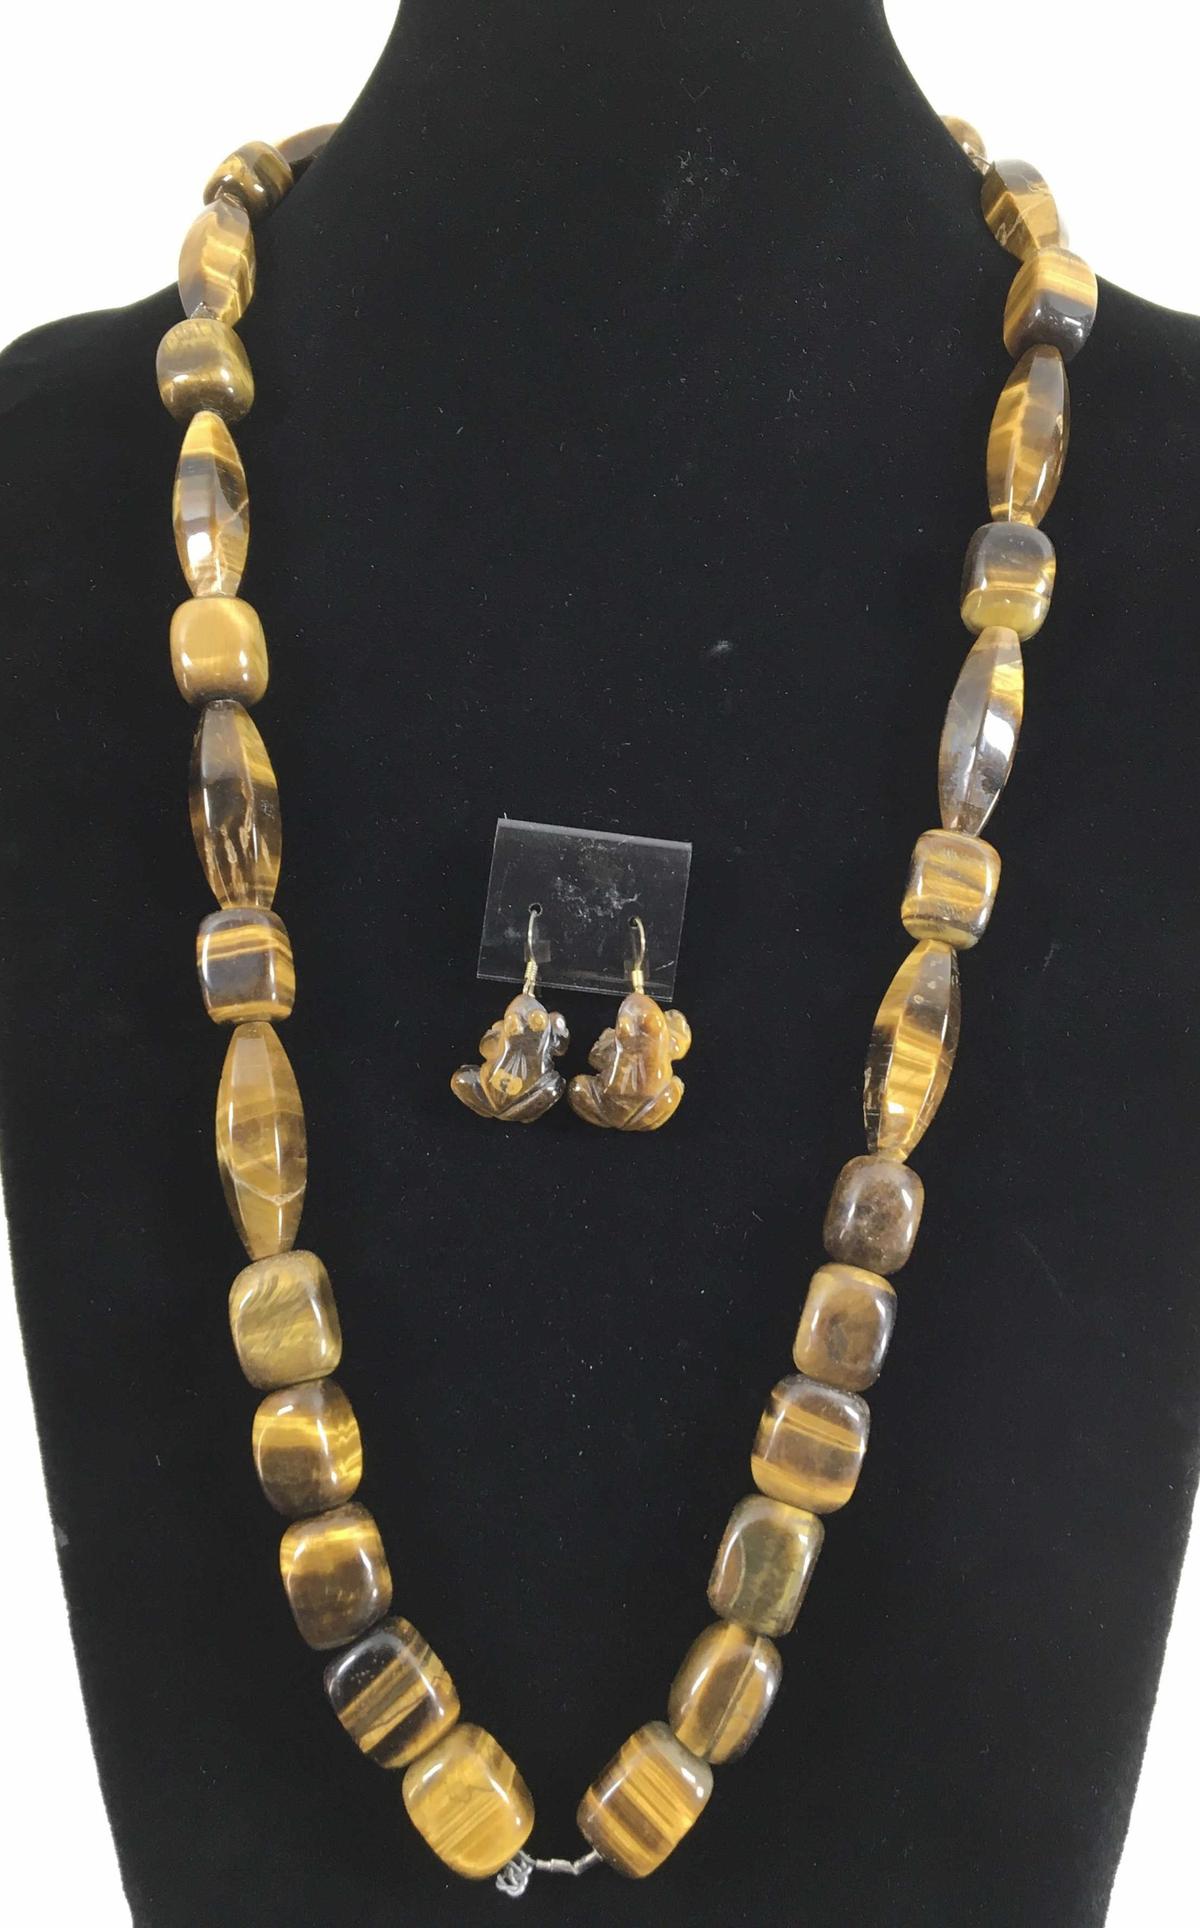 Tigers Eye Necklace And Frog Earrings